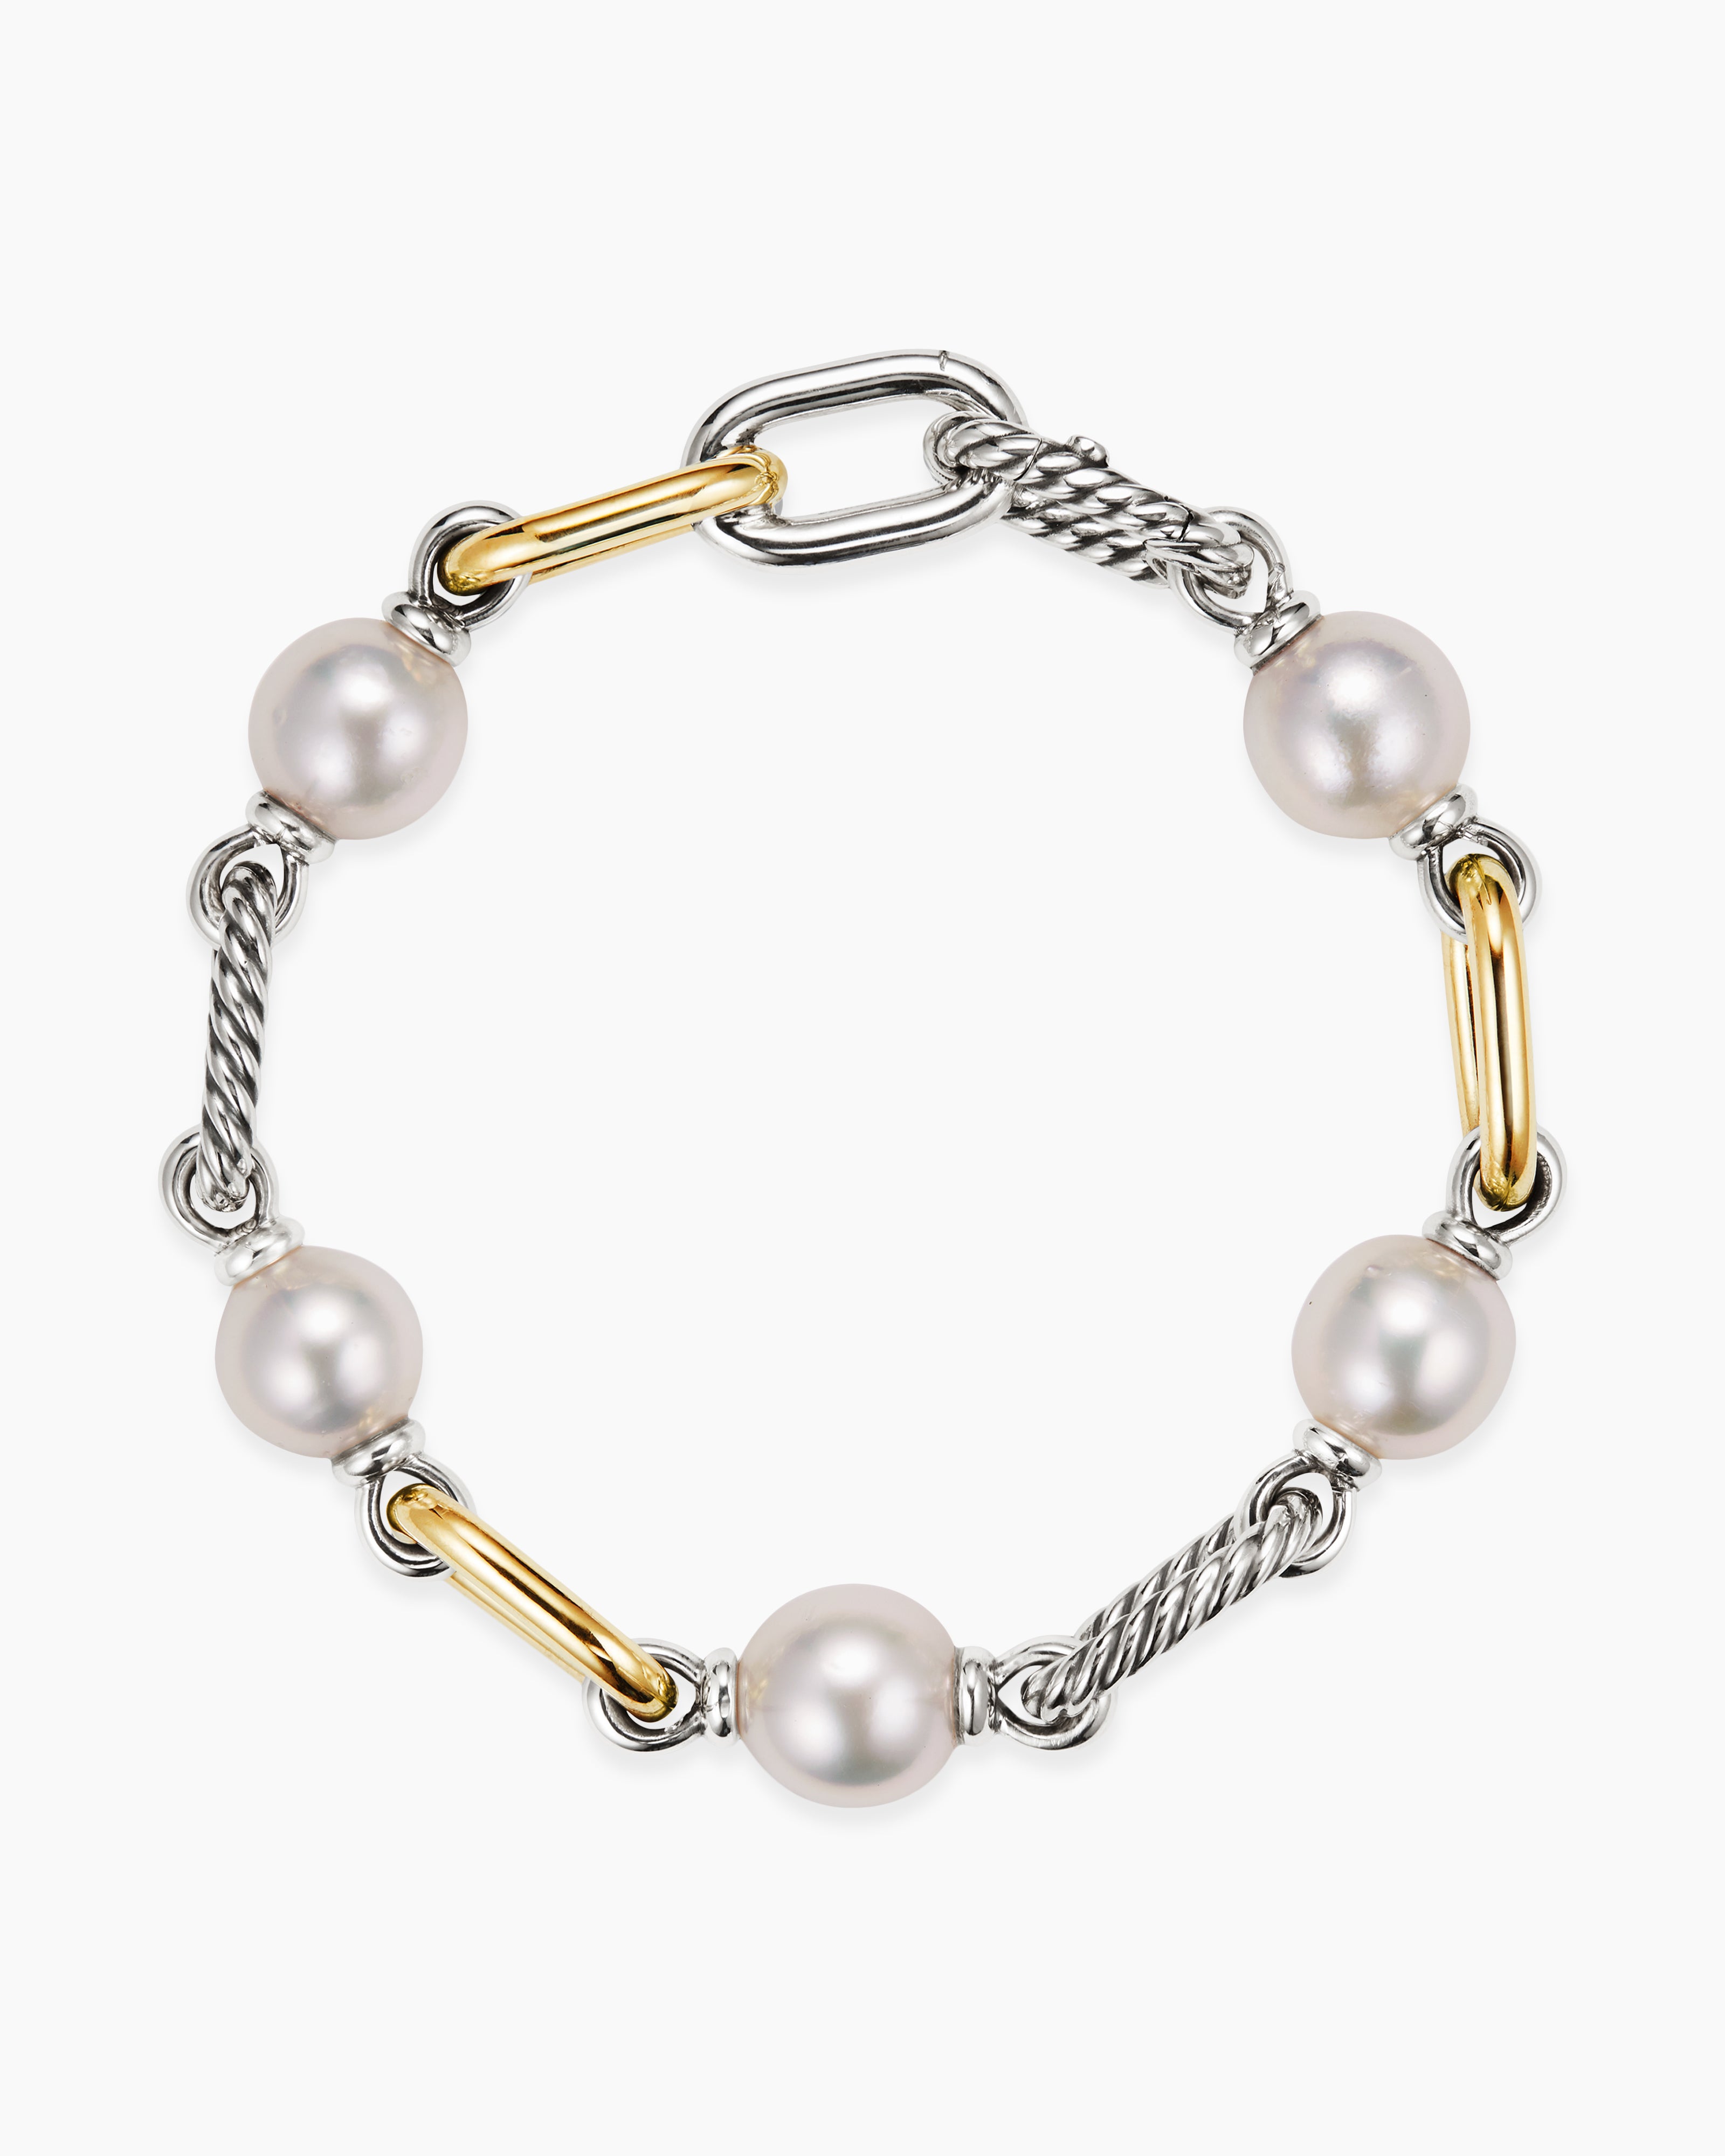 DY Madison Pearl Chain Bracelet in Sterling Silver with 18K Yellow Gold,  11mm | David Yurman